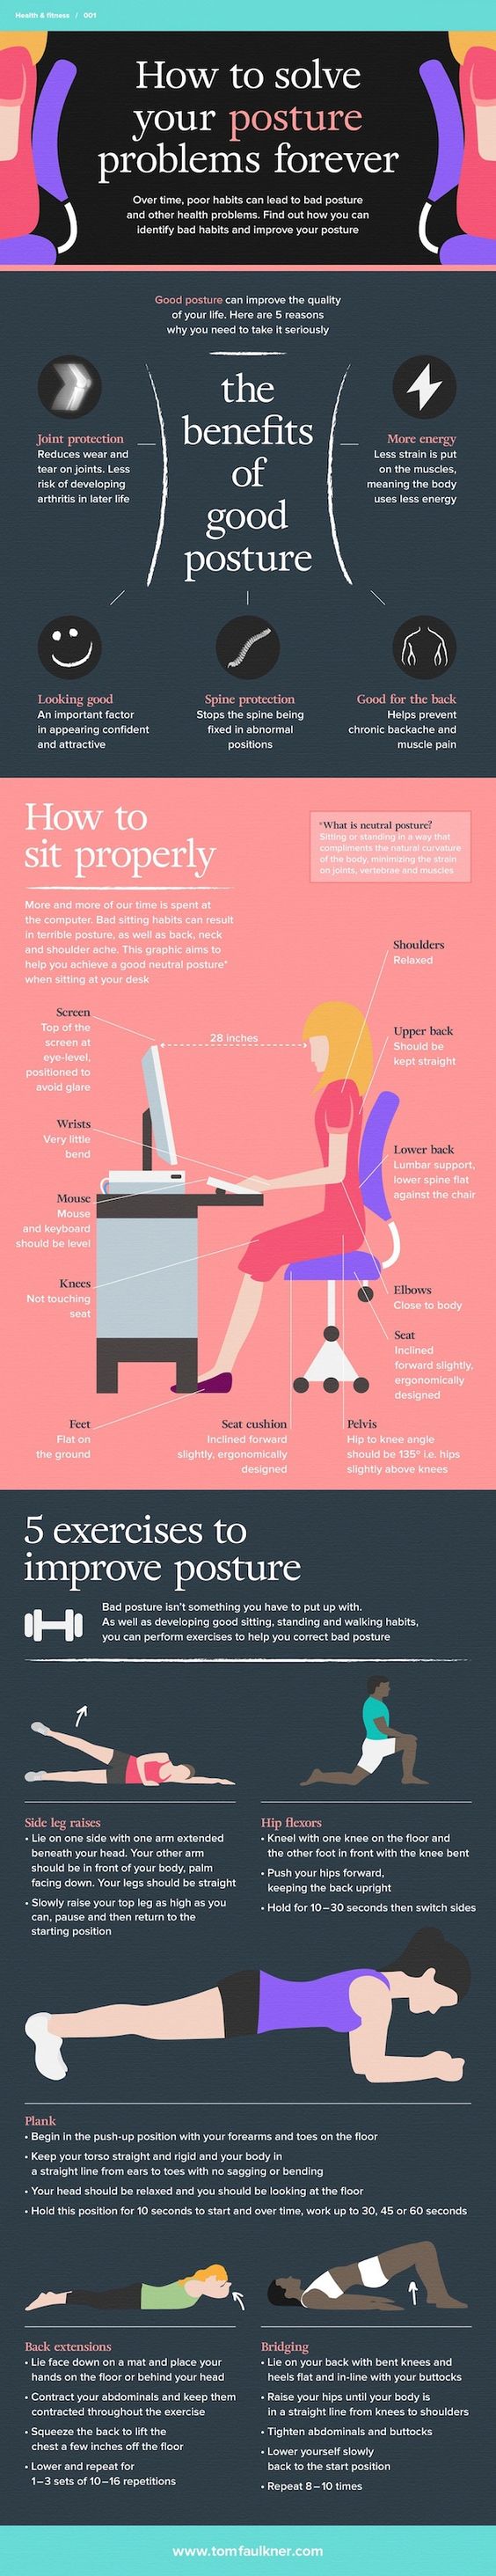 How to solve your posture problems forever - infographics